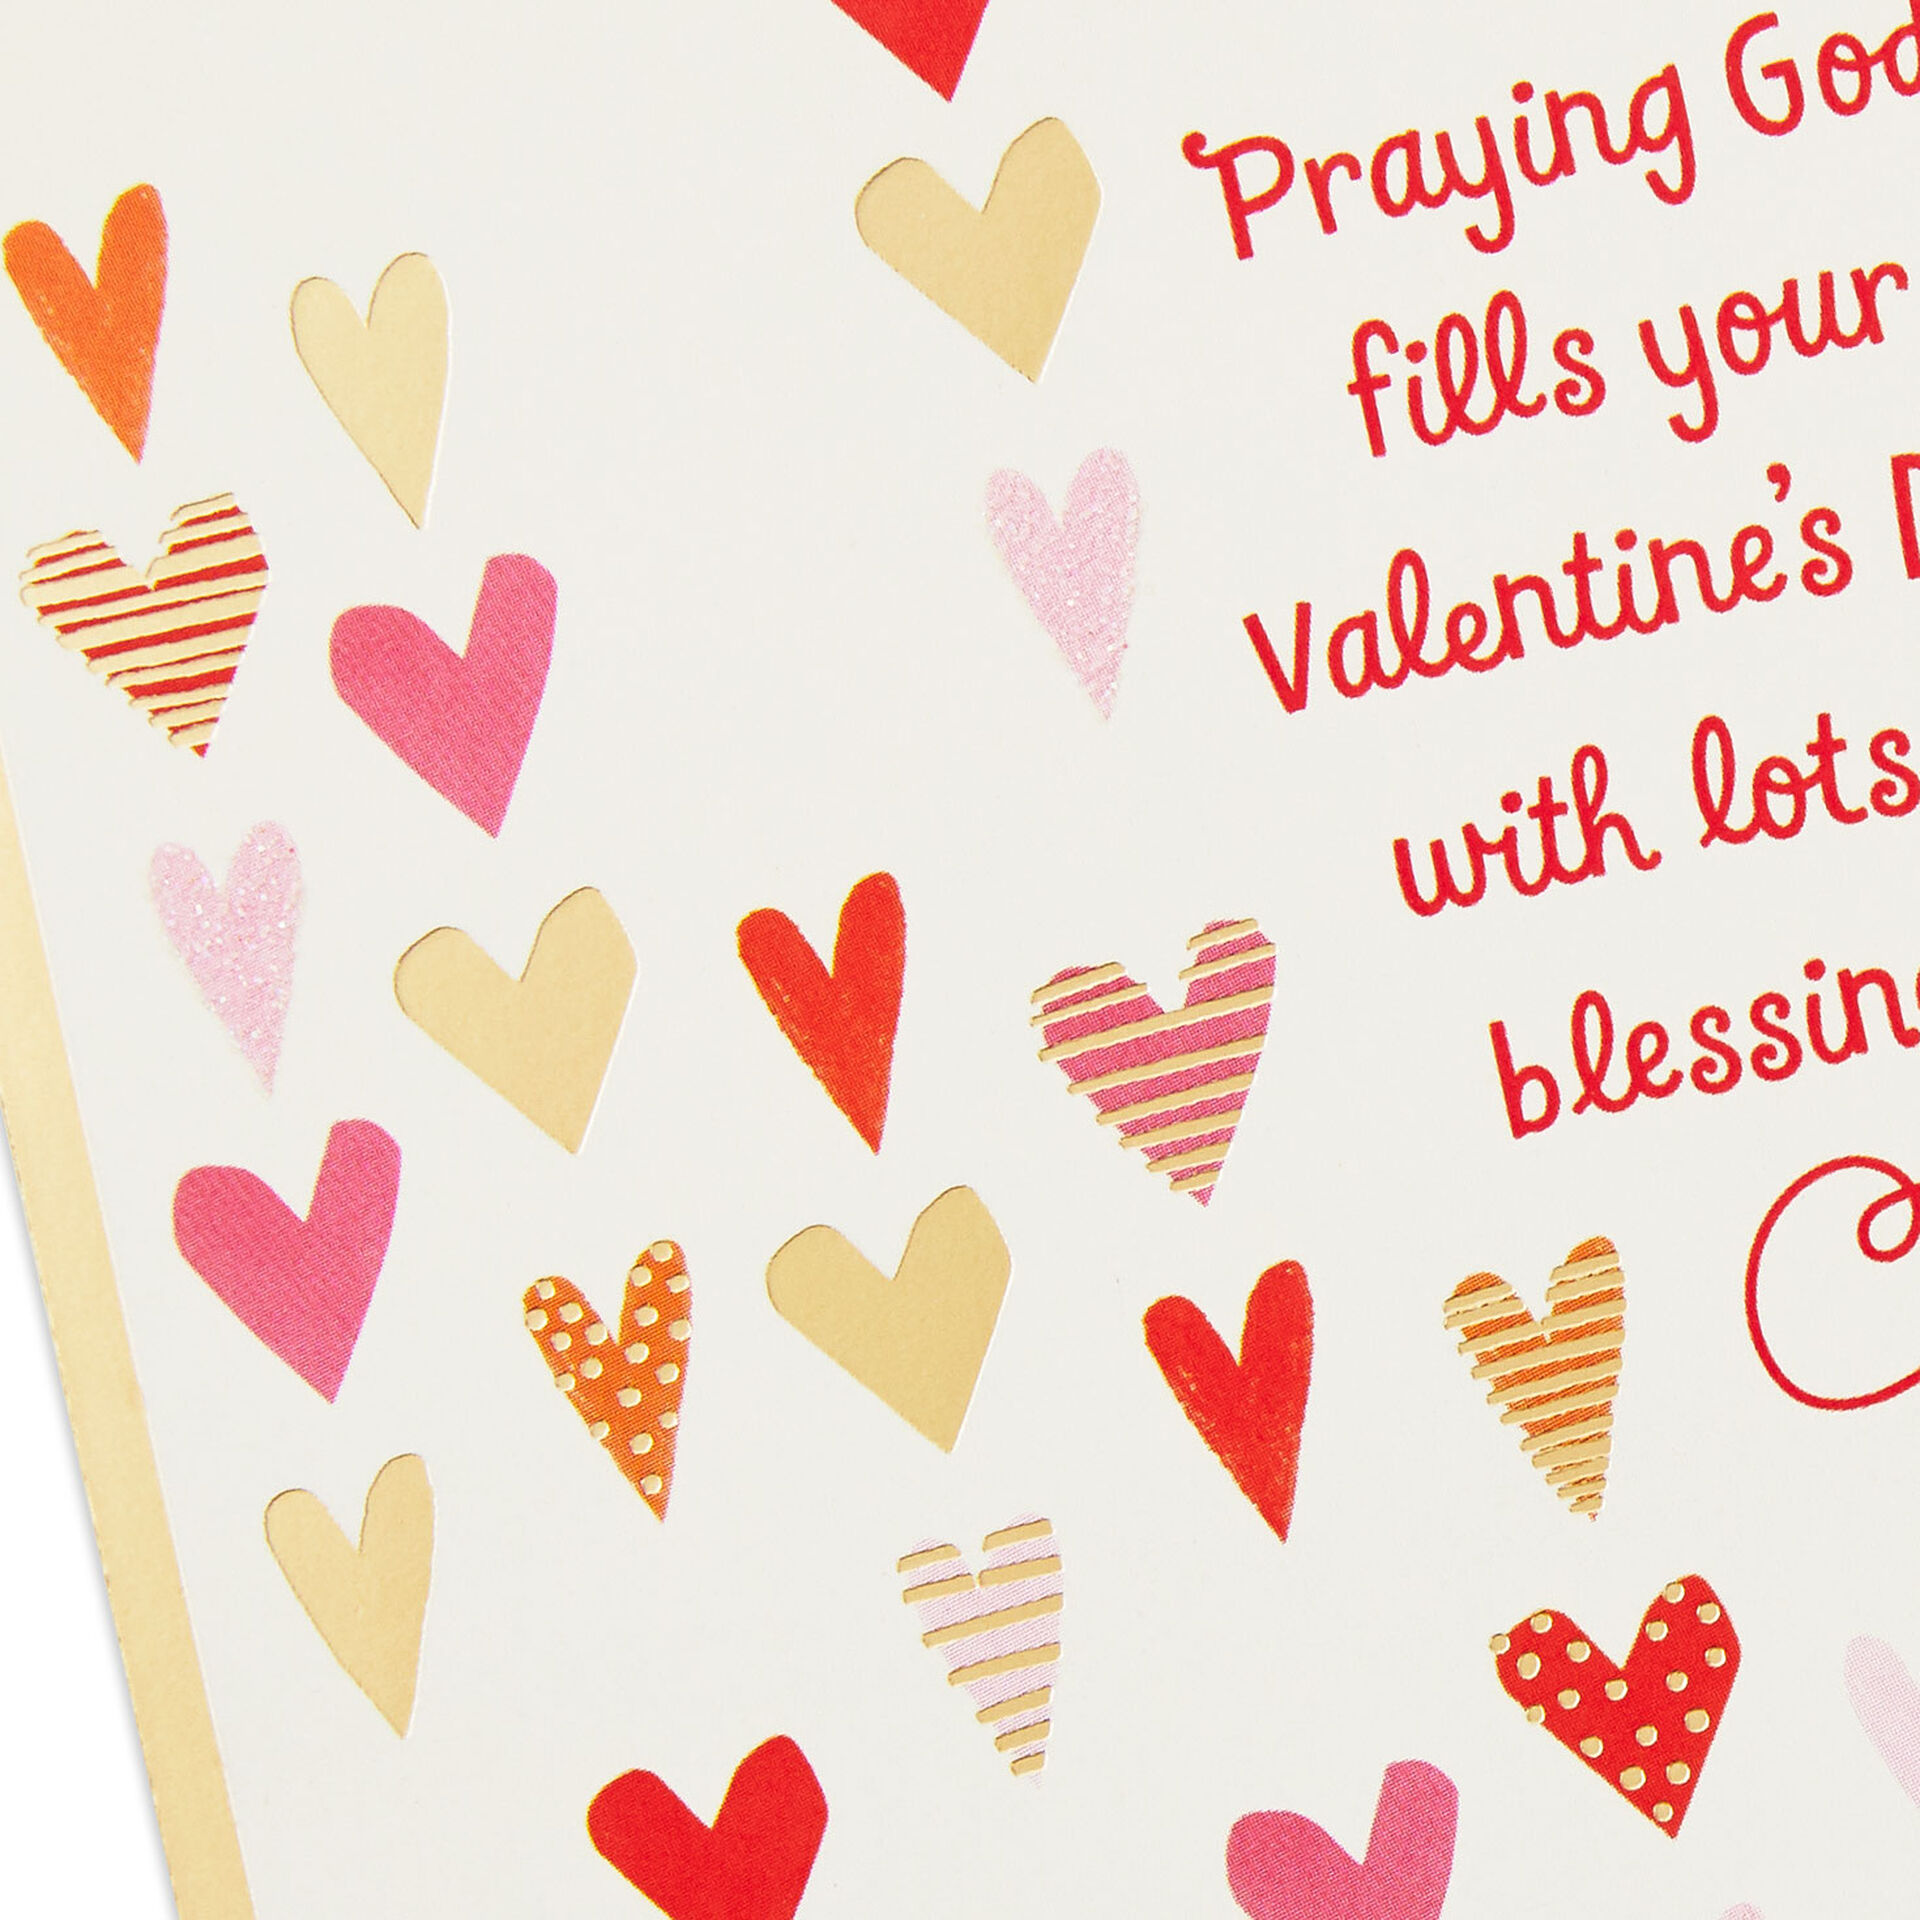 blessings-and-love-religious-valentine-s-day-cards-pack-of-6-boxed